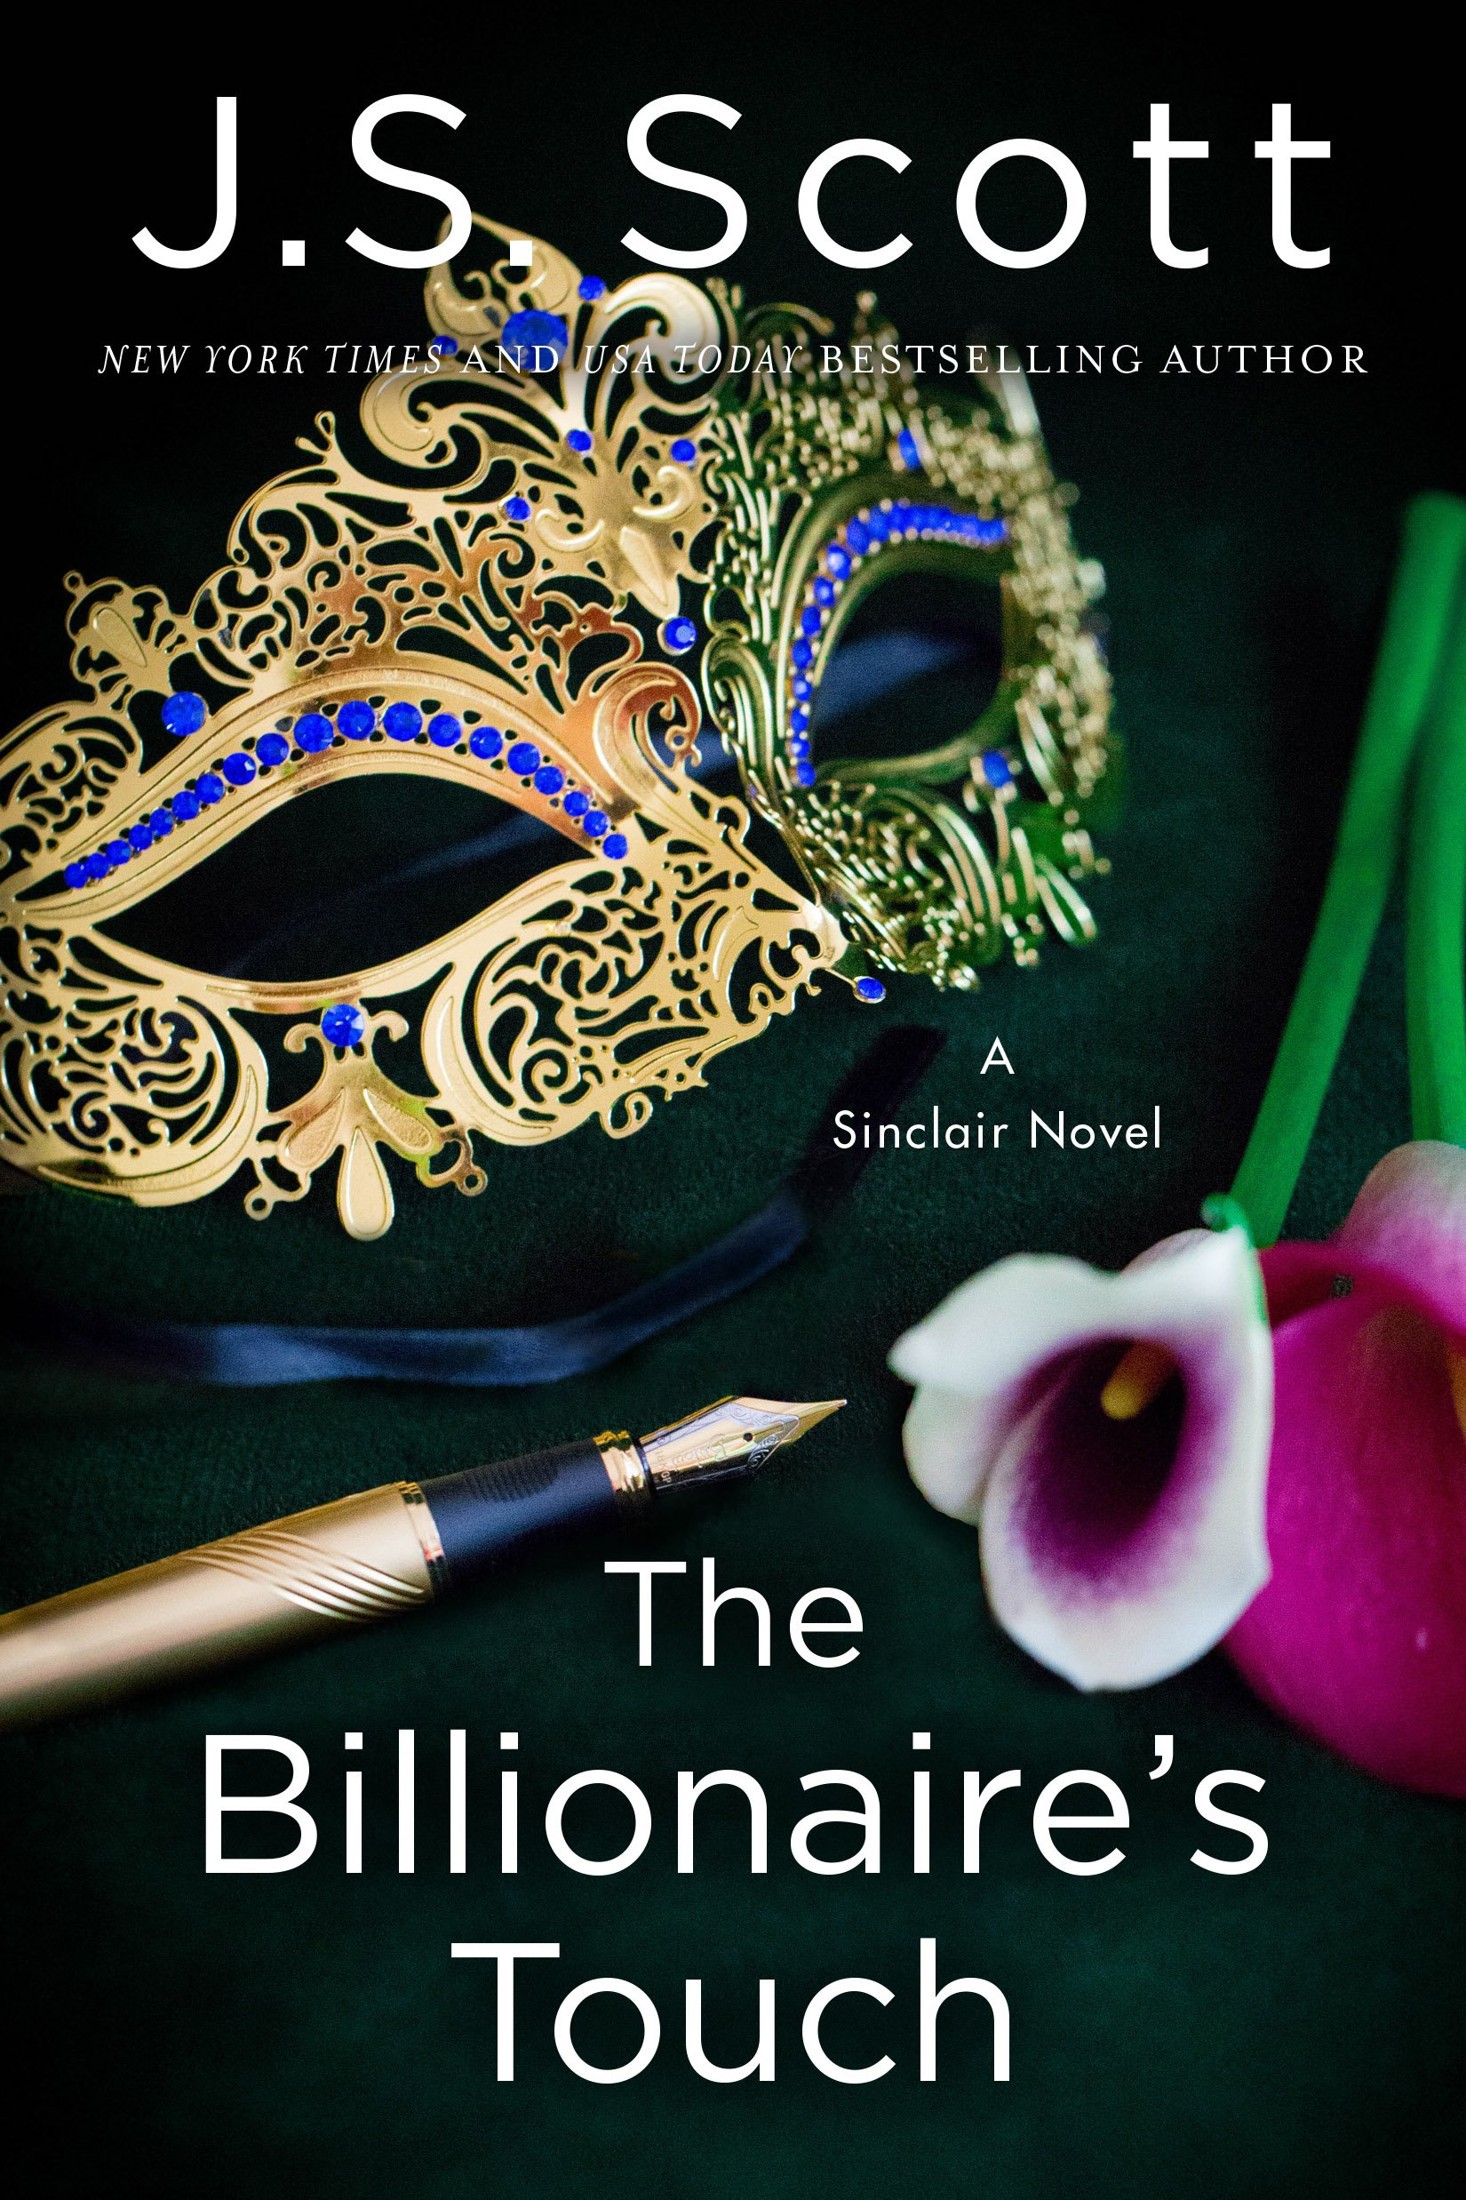 The Billionaire's Touch (The Sinclairs #3) by J. S. Scott